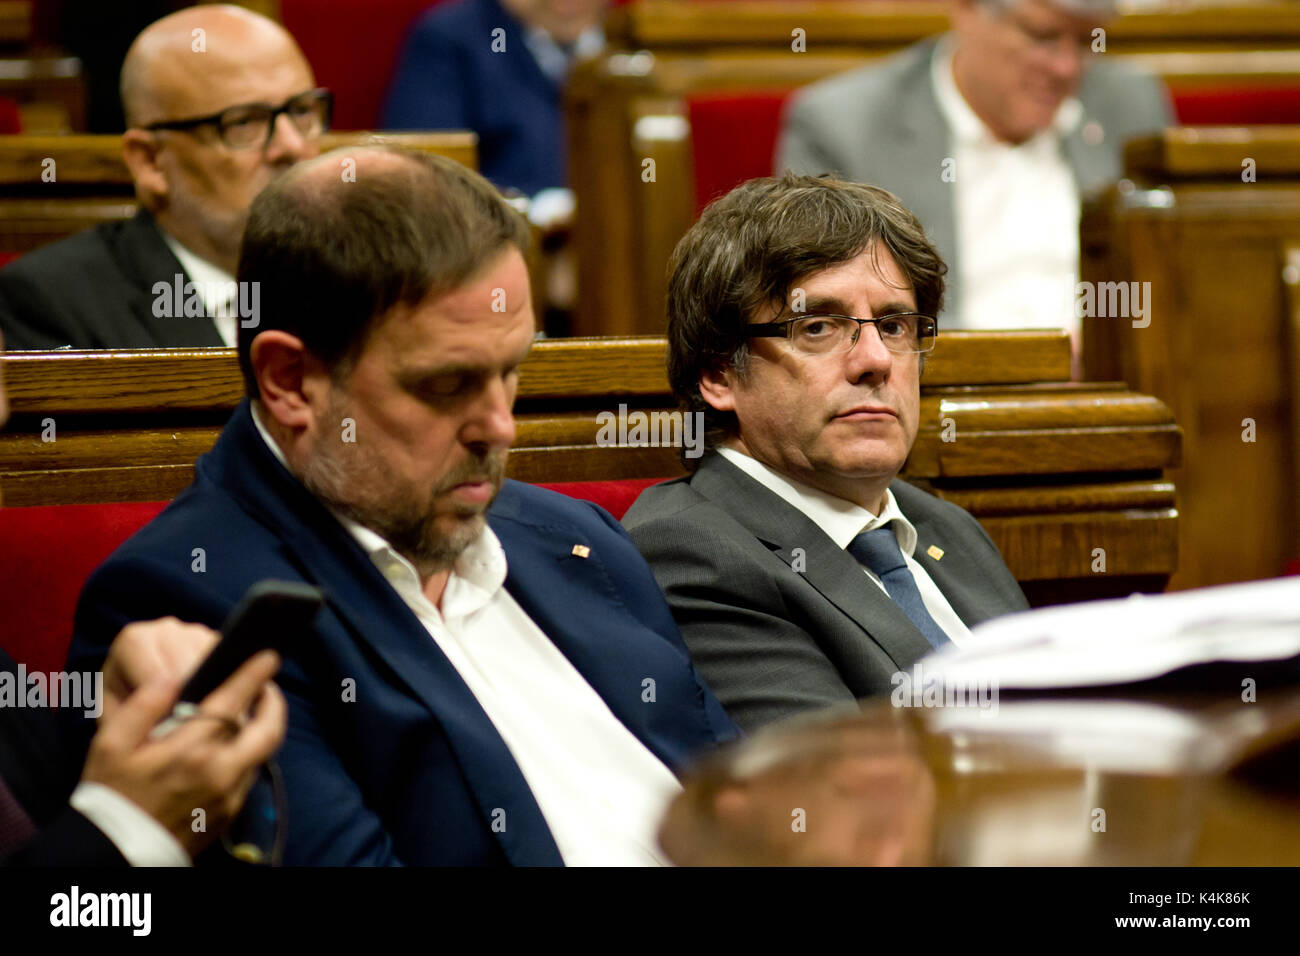 Barcelona, Catalonia, Spain. 6th Sep, 2017. Catalan regional president CARLES PUIGDEMONT (R) and catalan vice-president ORIOL JUNQUERAS (L) during the parliamentary session in the Catalonia Parliament. The Catalan Parliament has passed a law to call a referendum of independence the next first of October. The unionist forces of Catalonia and the Spanish government are frontally opposed to the referendum and consider it illegal. Credit: Jordi Boixareu/ZUMA Wire/Alamy Live News Stock Photo